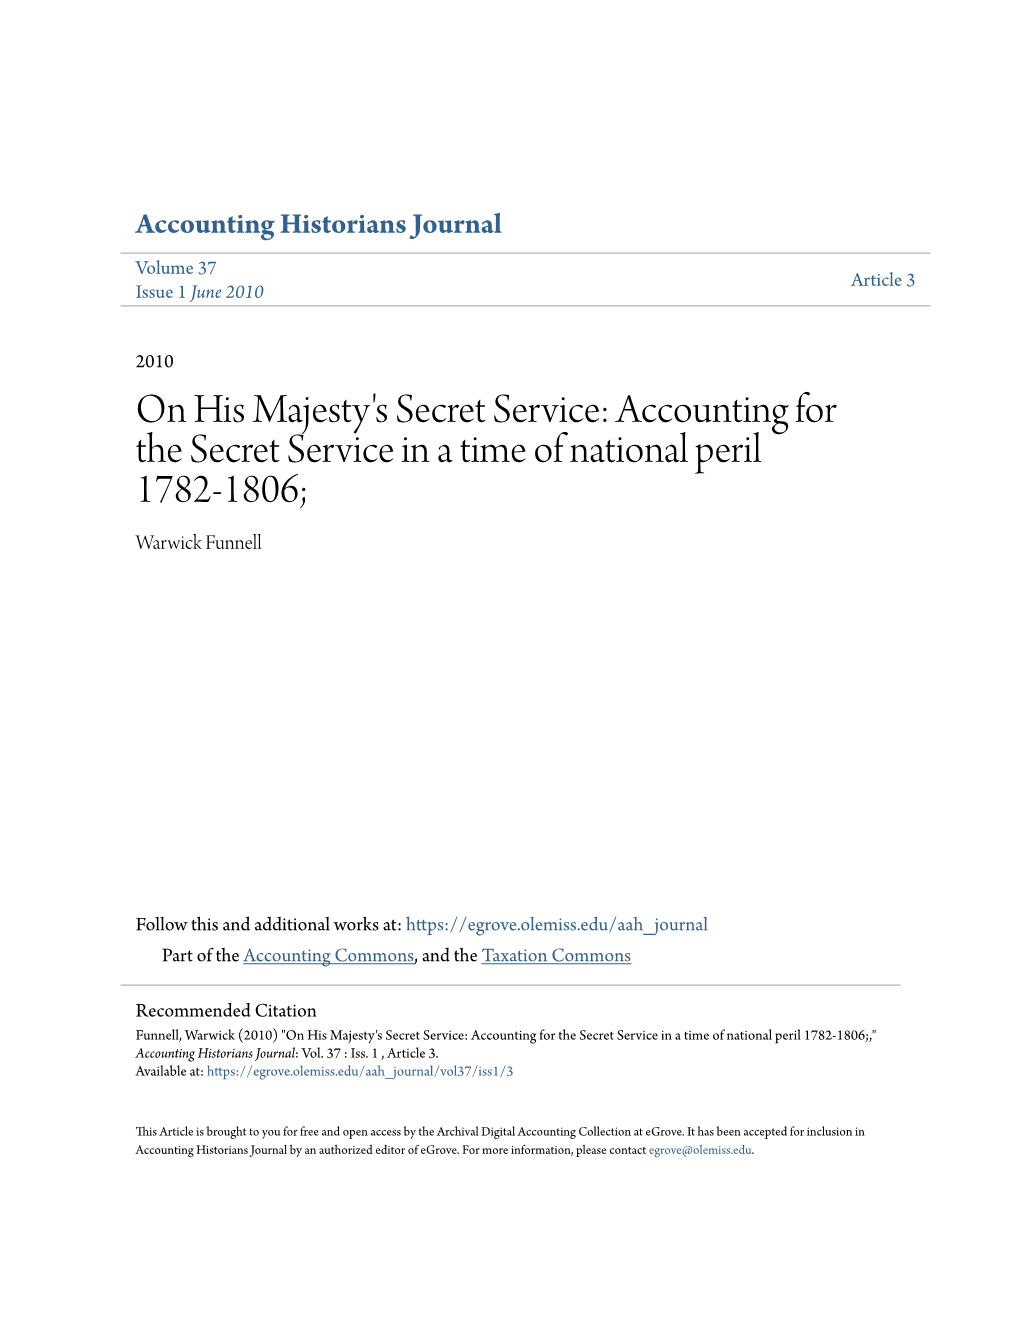 On His Majesty's Secret Service: Accounting for the Secret Service in a Time of National Peril 1782-1806; Warwick Funnell